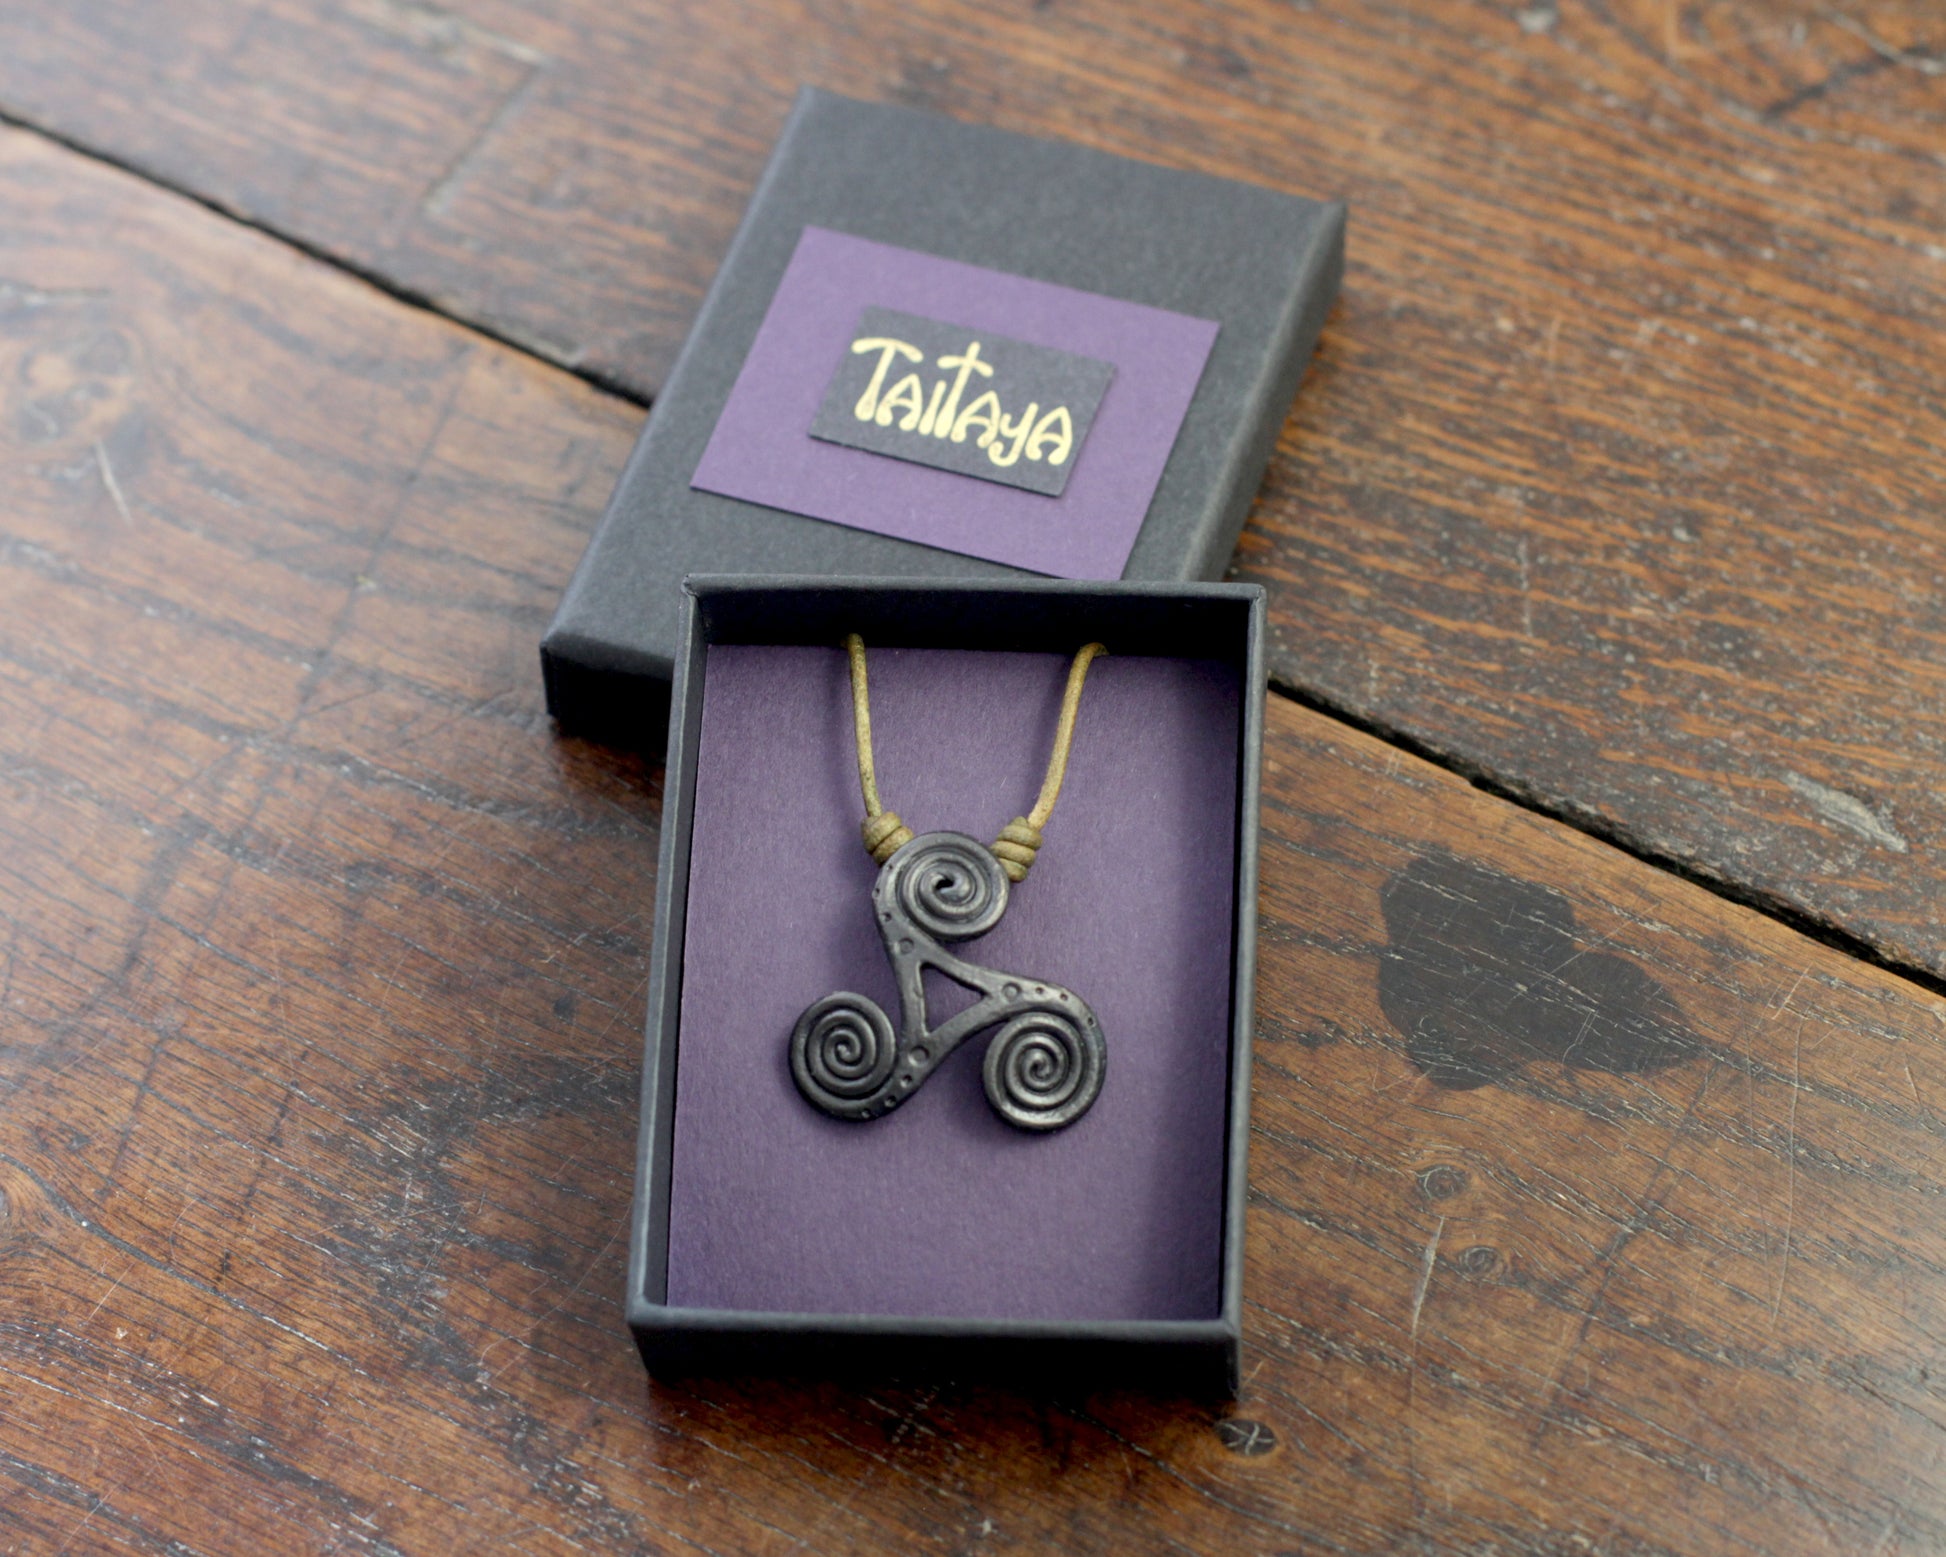 Hand Forged Iron Triskelion Necklace, designed and made by Blacksmith Marleena Barran from Taitaya Forge.  Presented in a Purple Gift Box